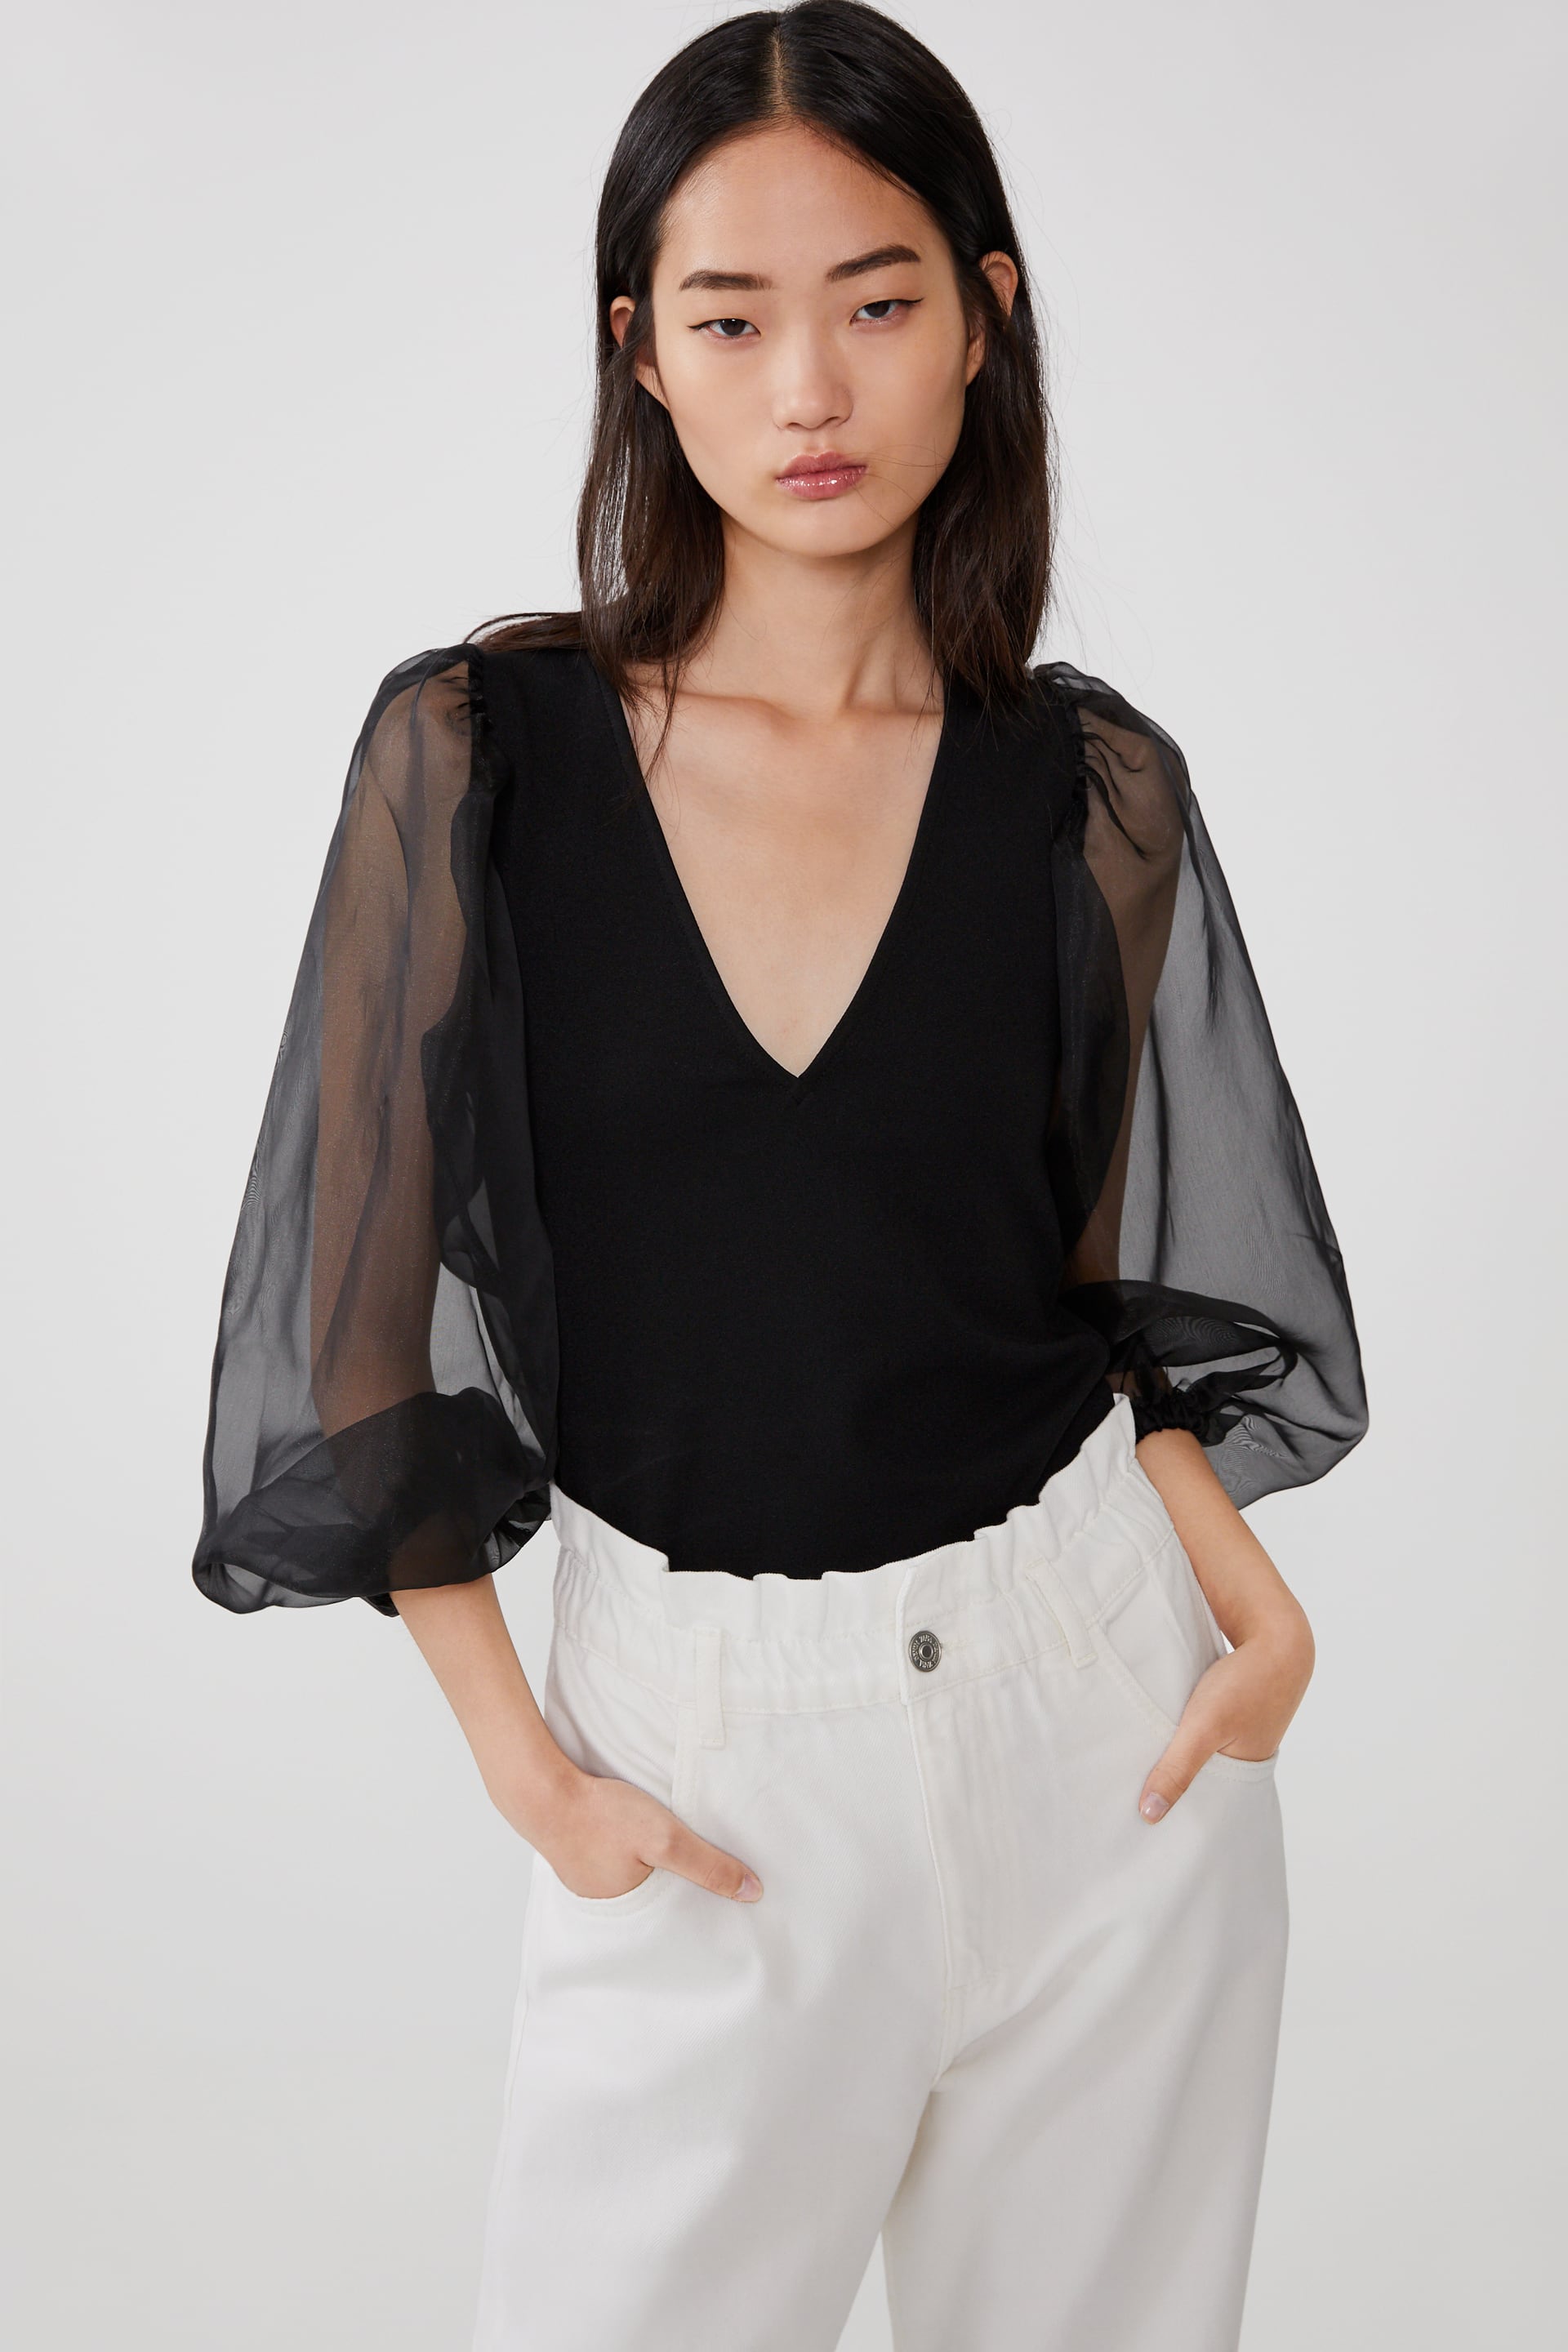 This Feminine Twist on Basic Tops Can Totally Transform Your Look ...